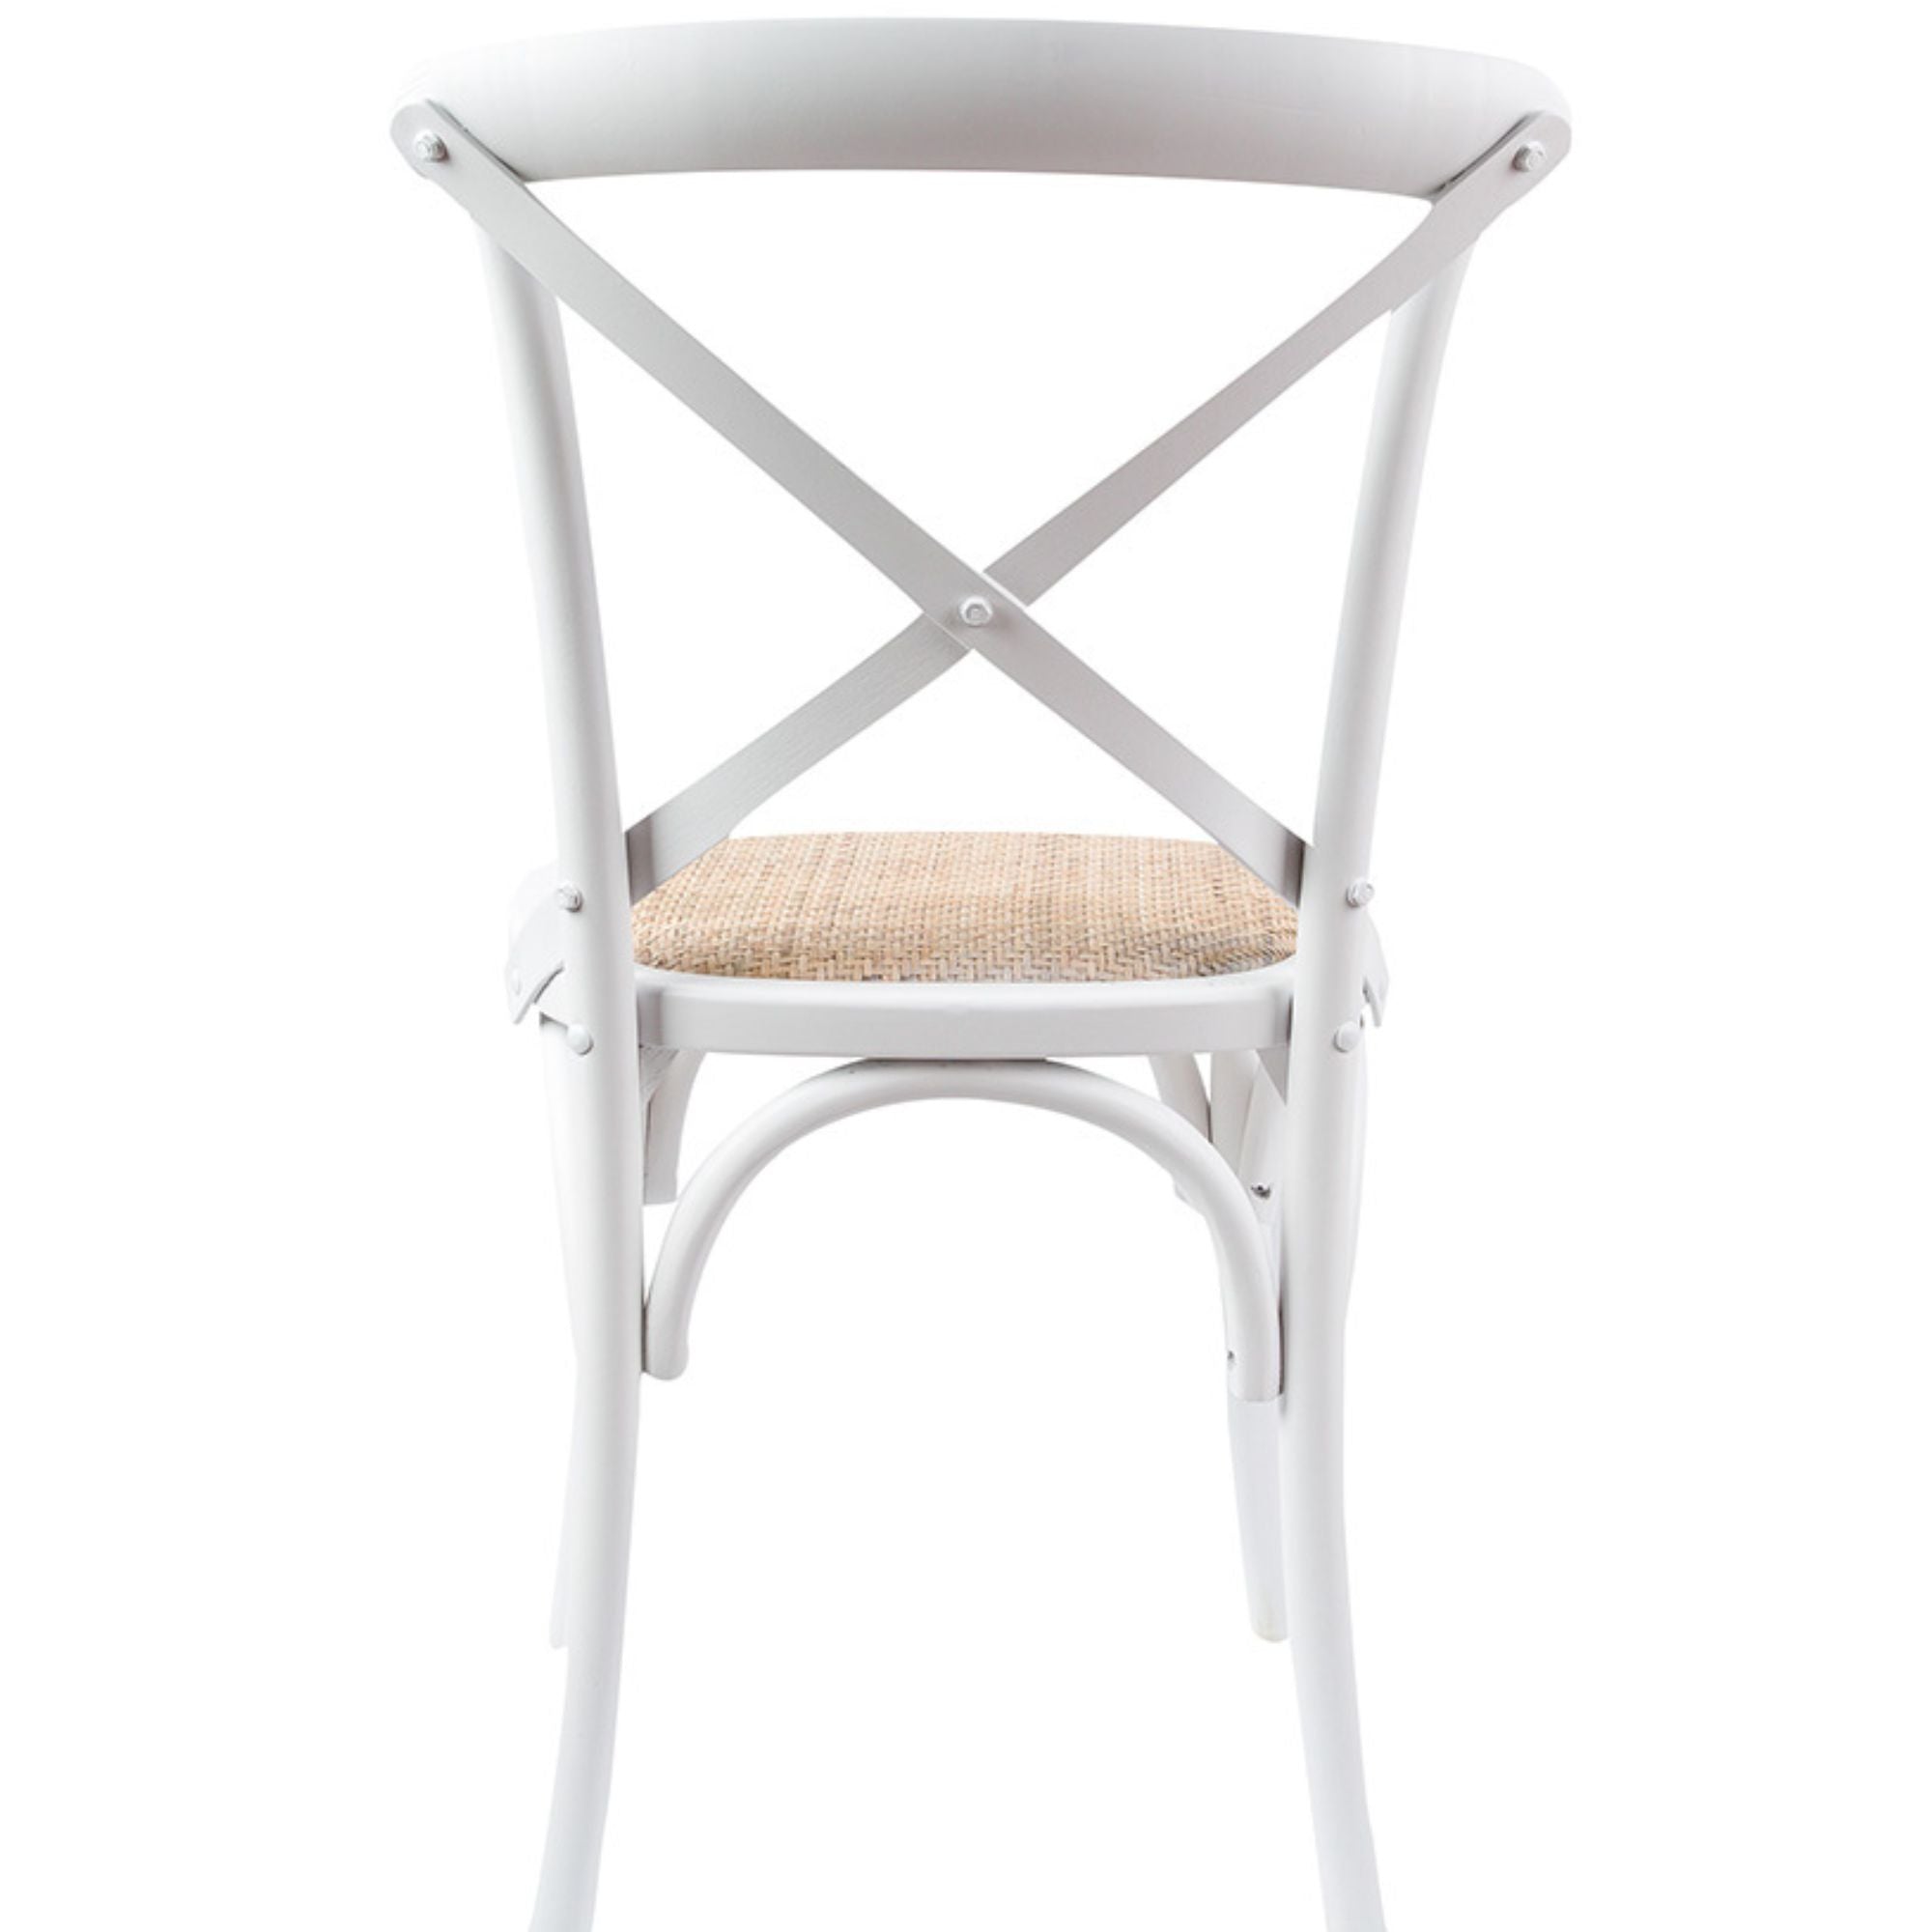 Aster Crossback Dining Chair Set of 2 Solid Birch Timber Wood Ratan Seat - White Deals499